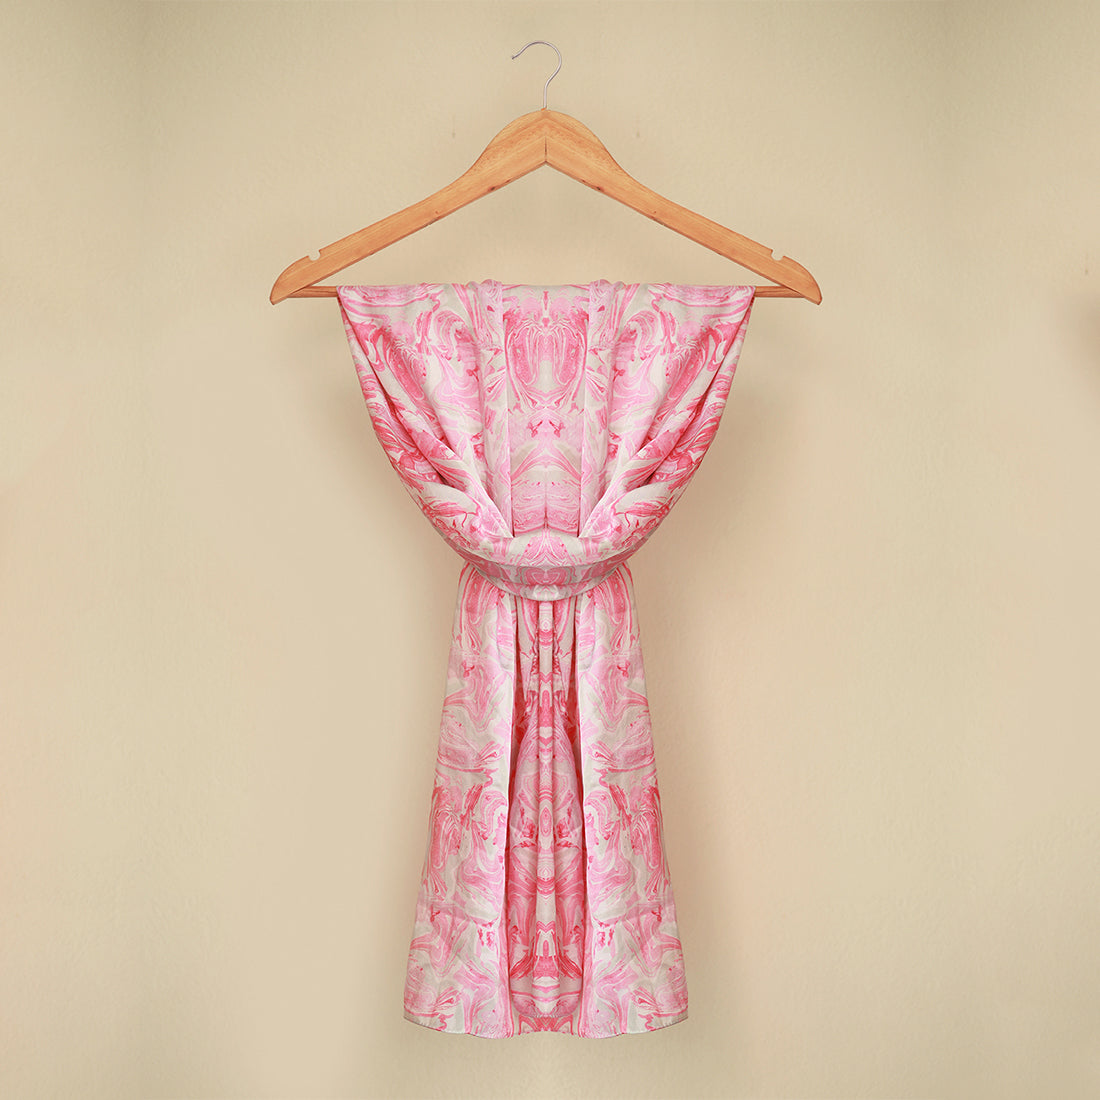 Grey & Pink Marble Print Multipurpose Satin Scarf in Grey and Pink for Daily and Party purpose for Women